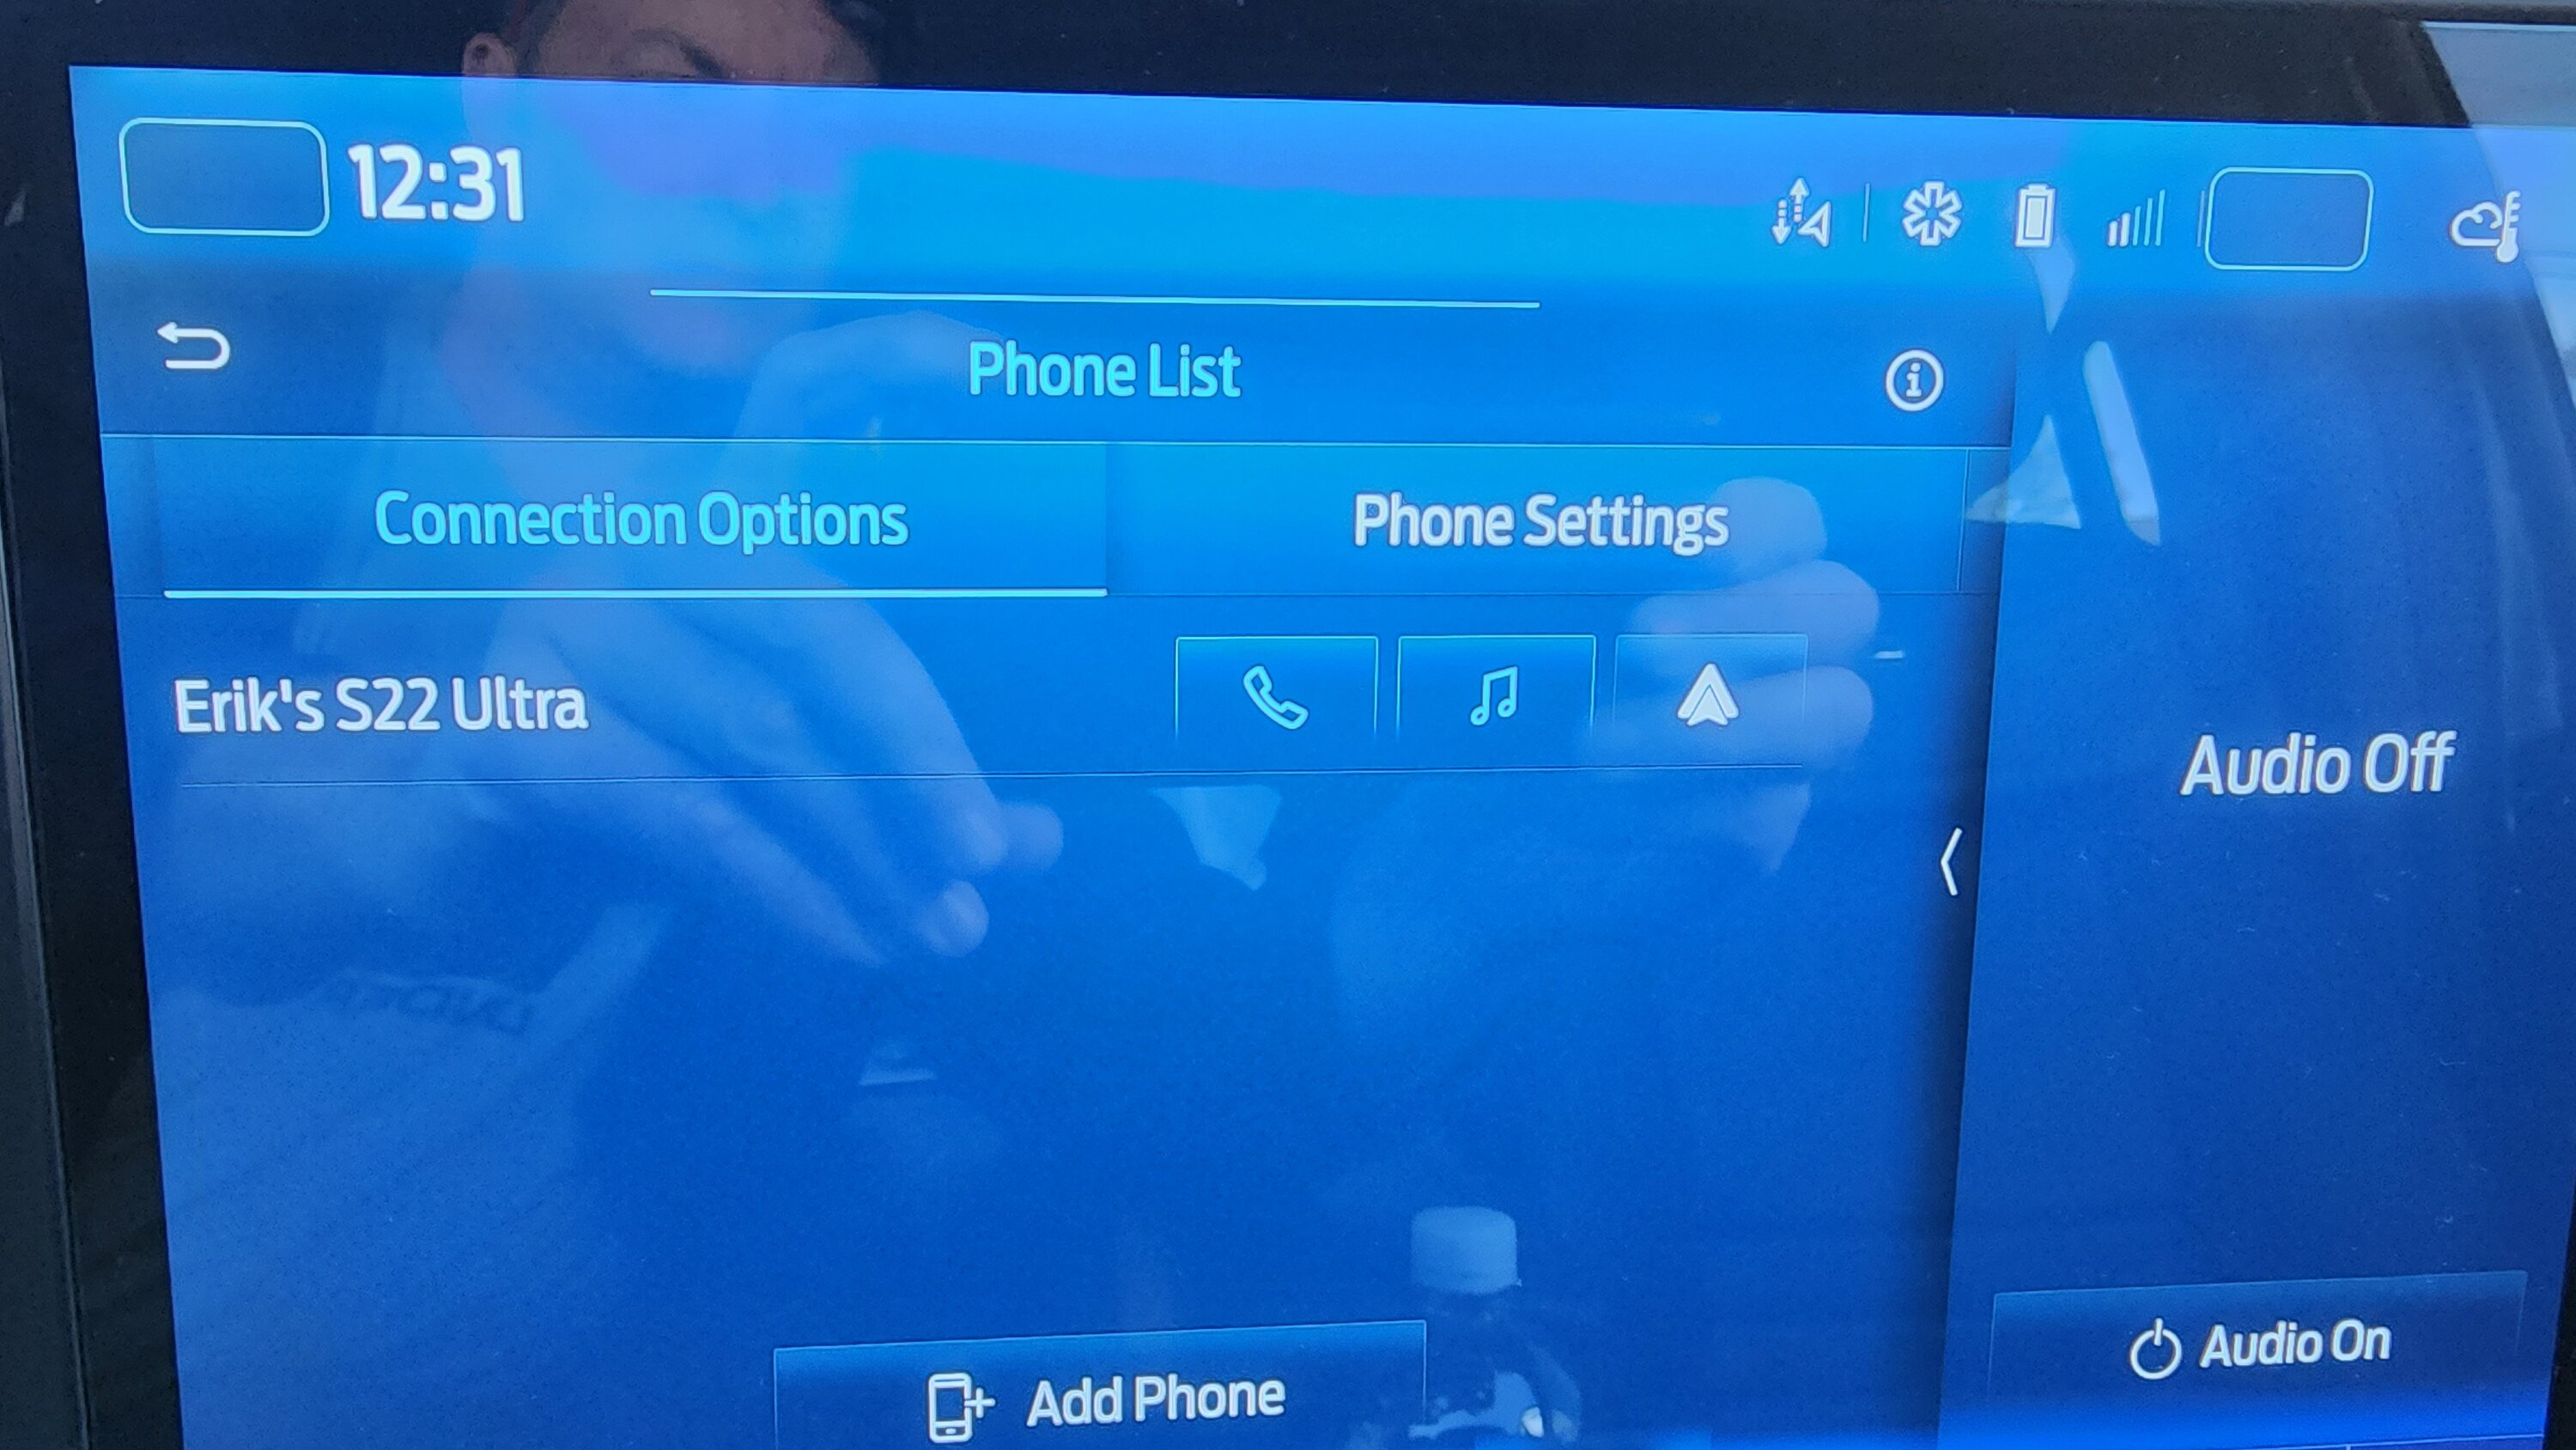 Ford F-150 Sync 4 won't notify about new texts 20230402_123154